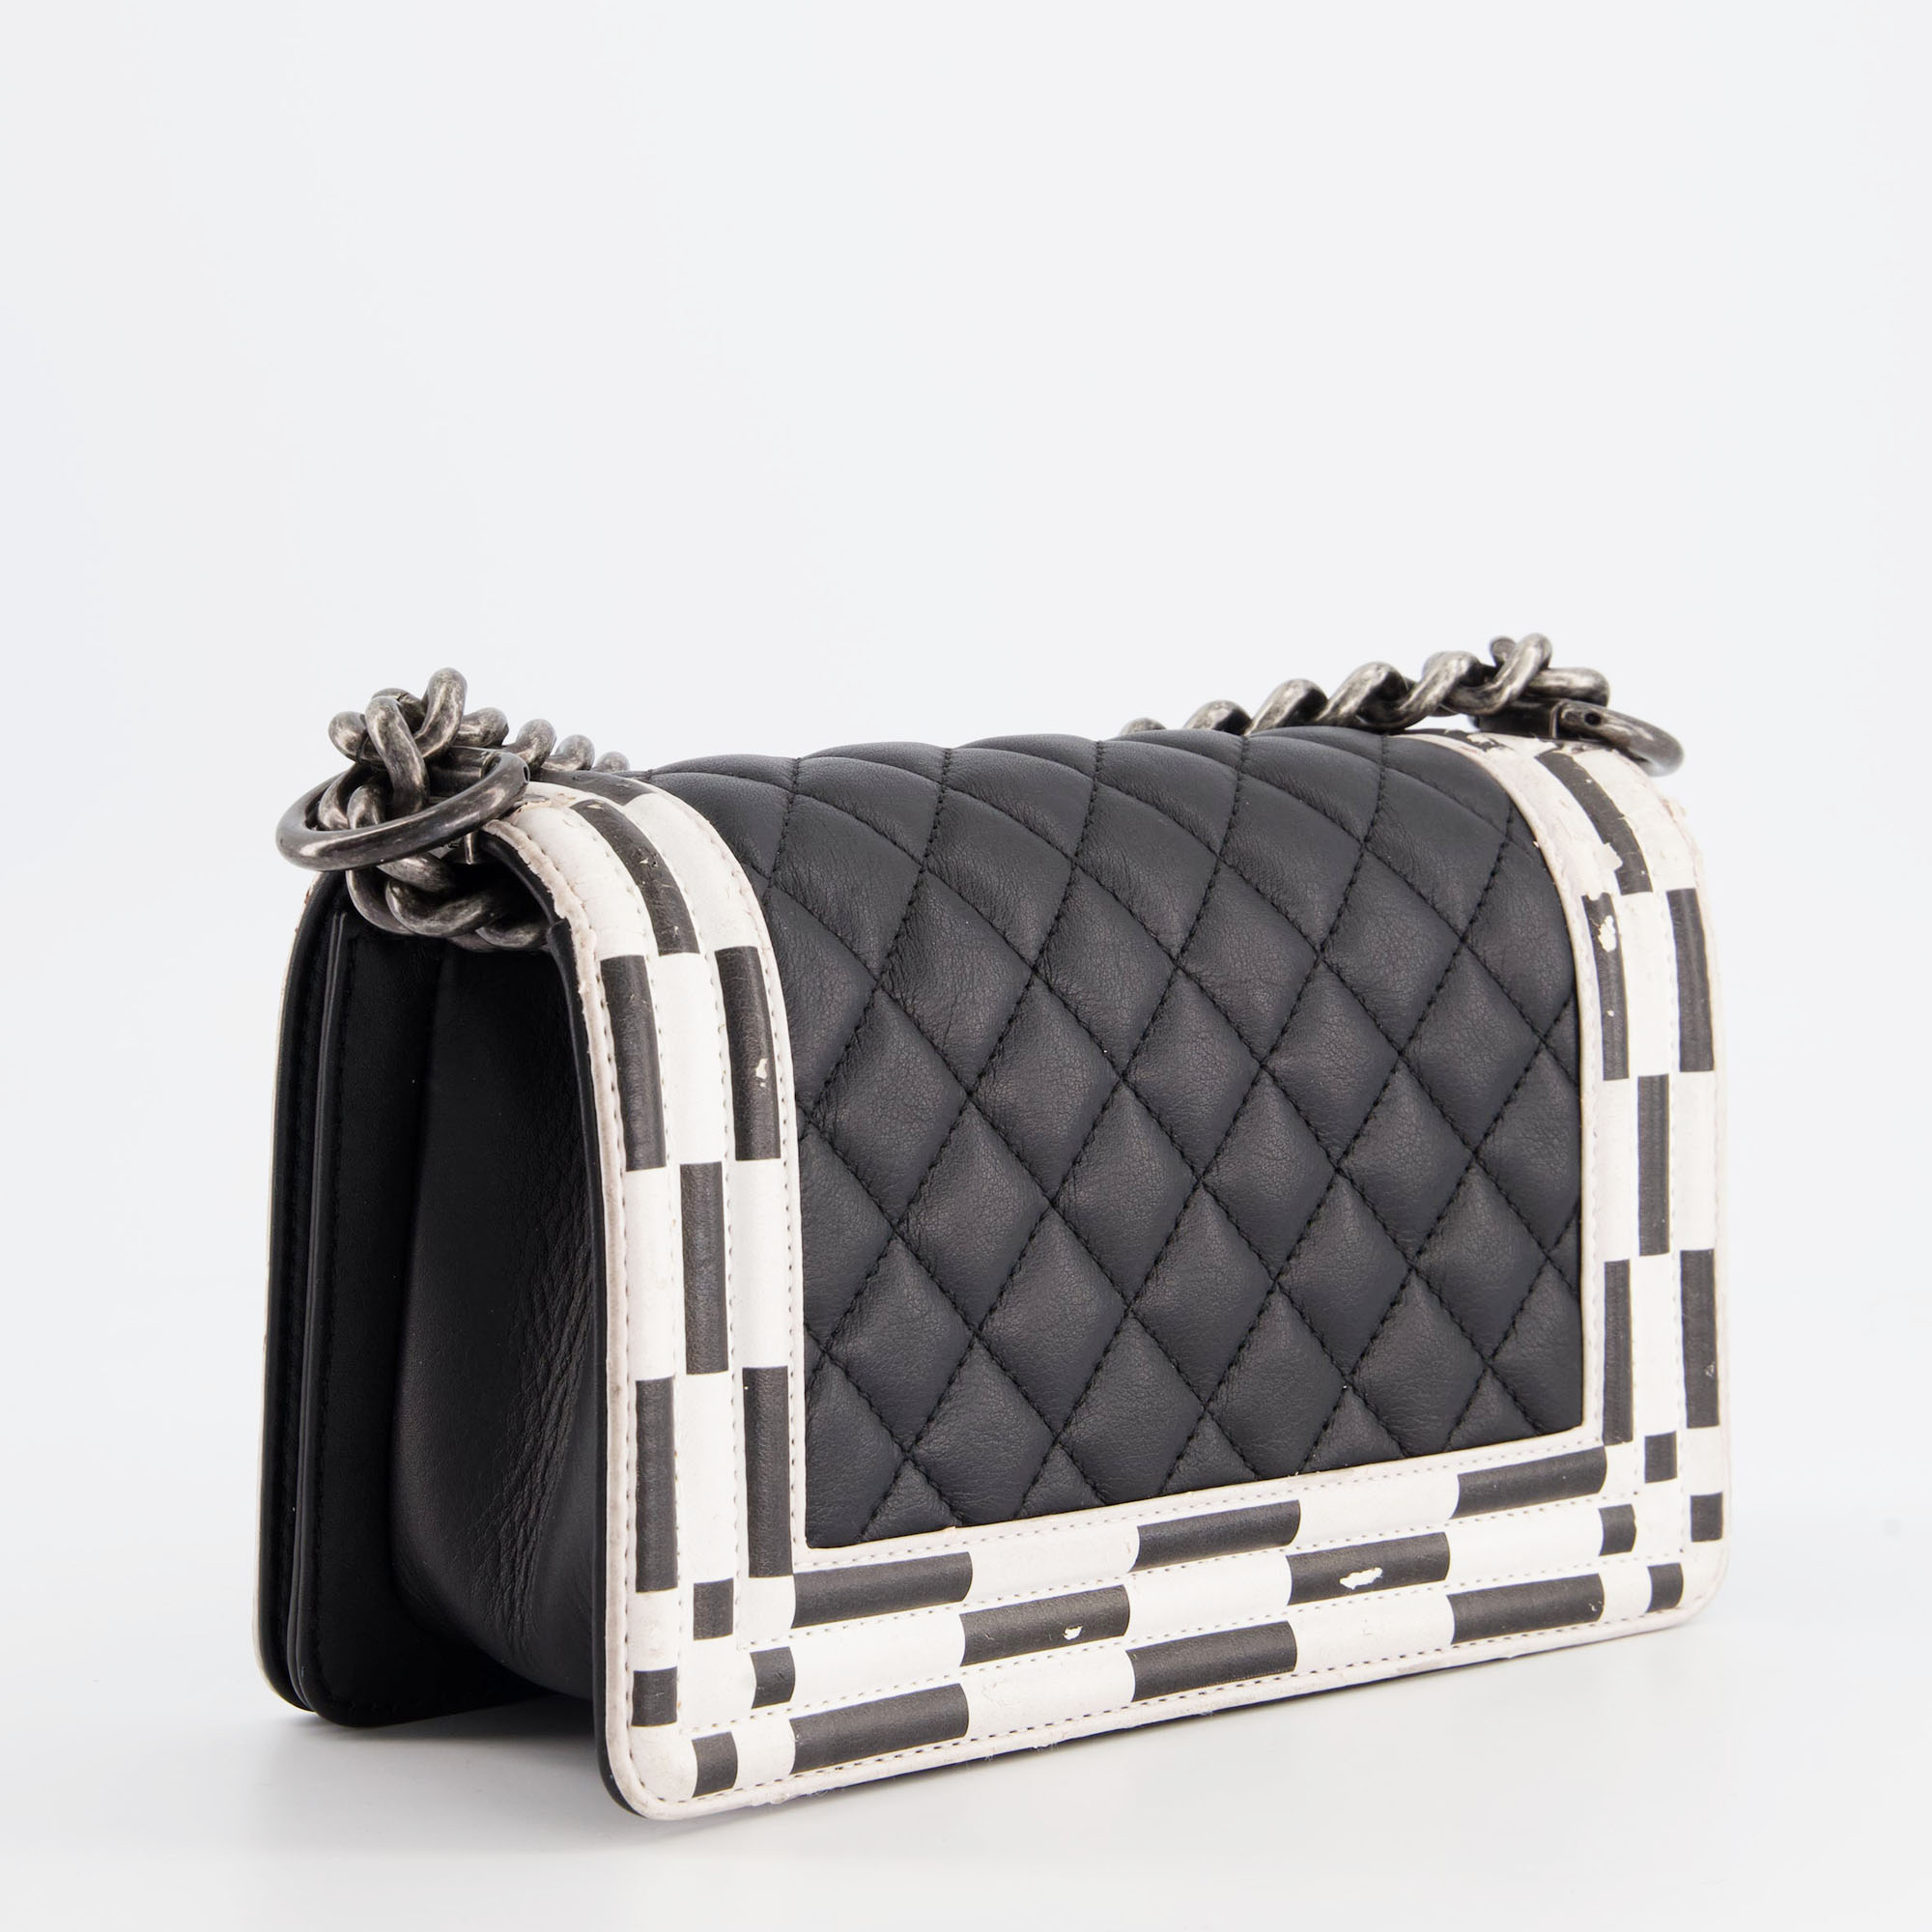 Chanel Black & White Small Boy Bag In Lambskin Leather With Ruthenium Hardware